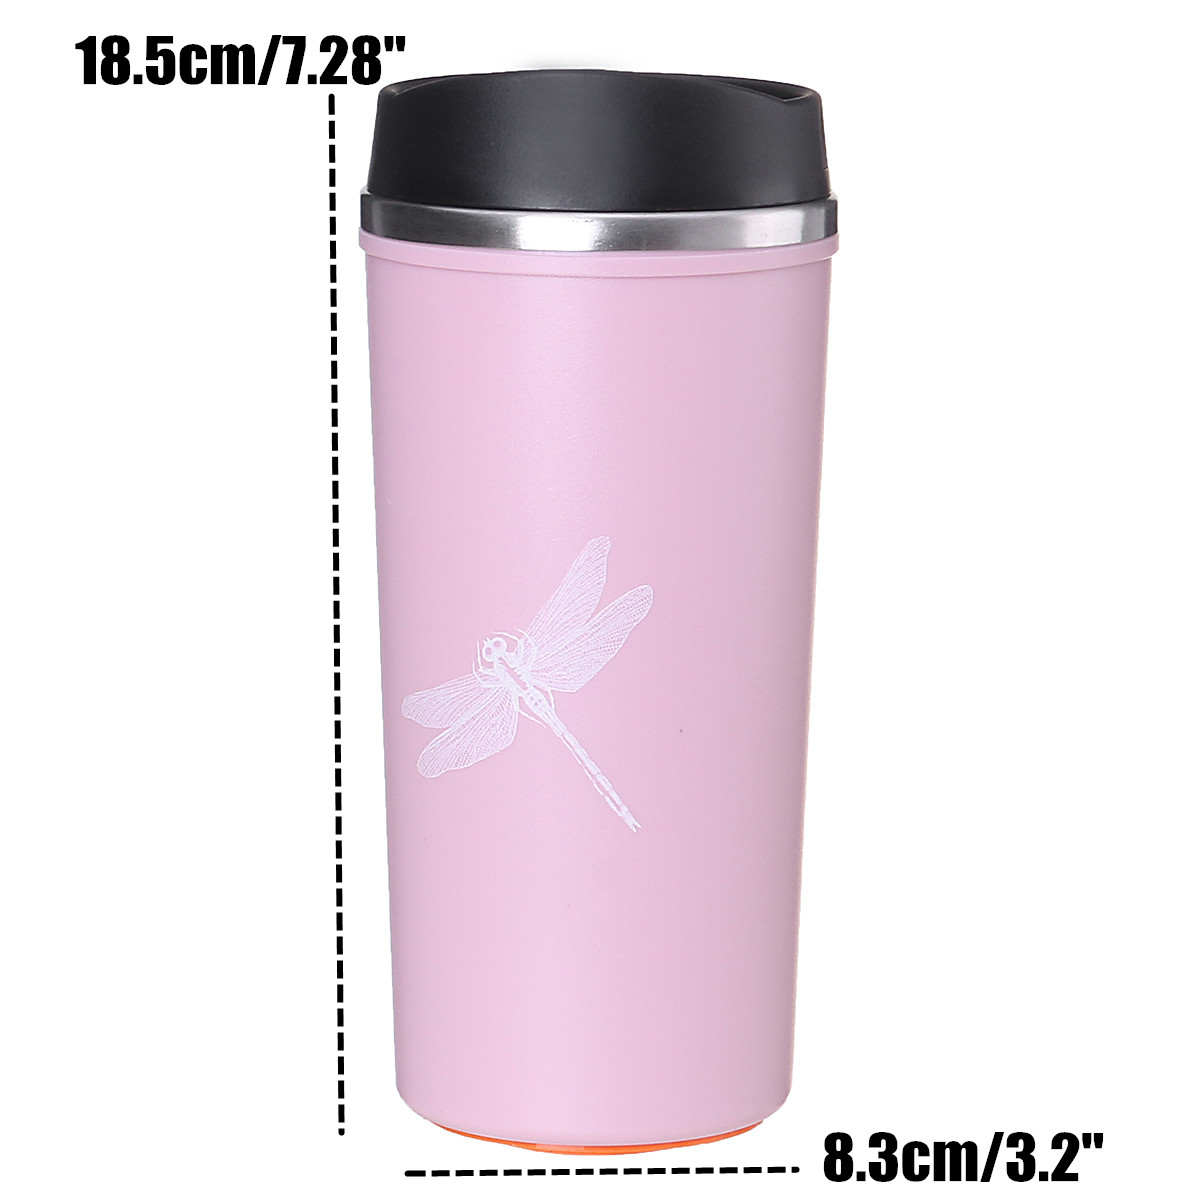 500ml-Stainless-Steel-Suction-Water-Bottle-Vacuum-Insulated-Mug-Coffee-Cup-Gift-1541993